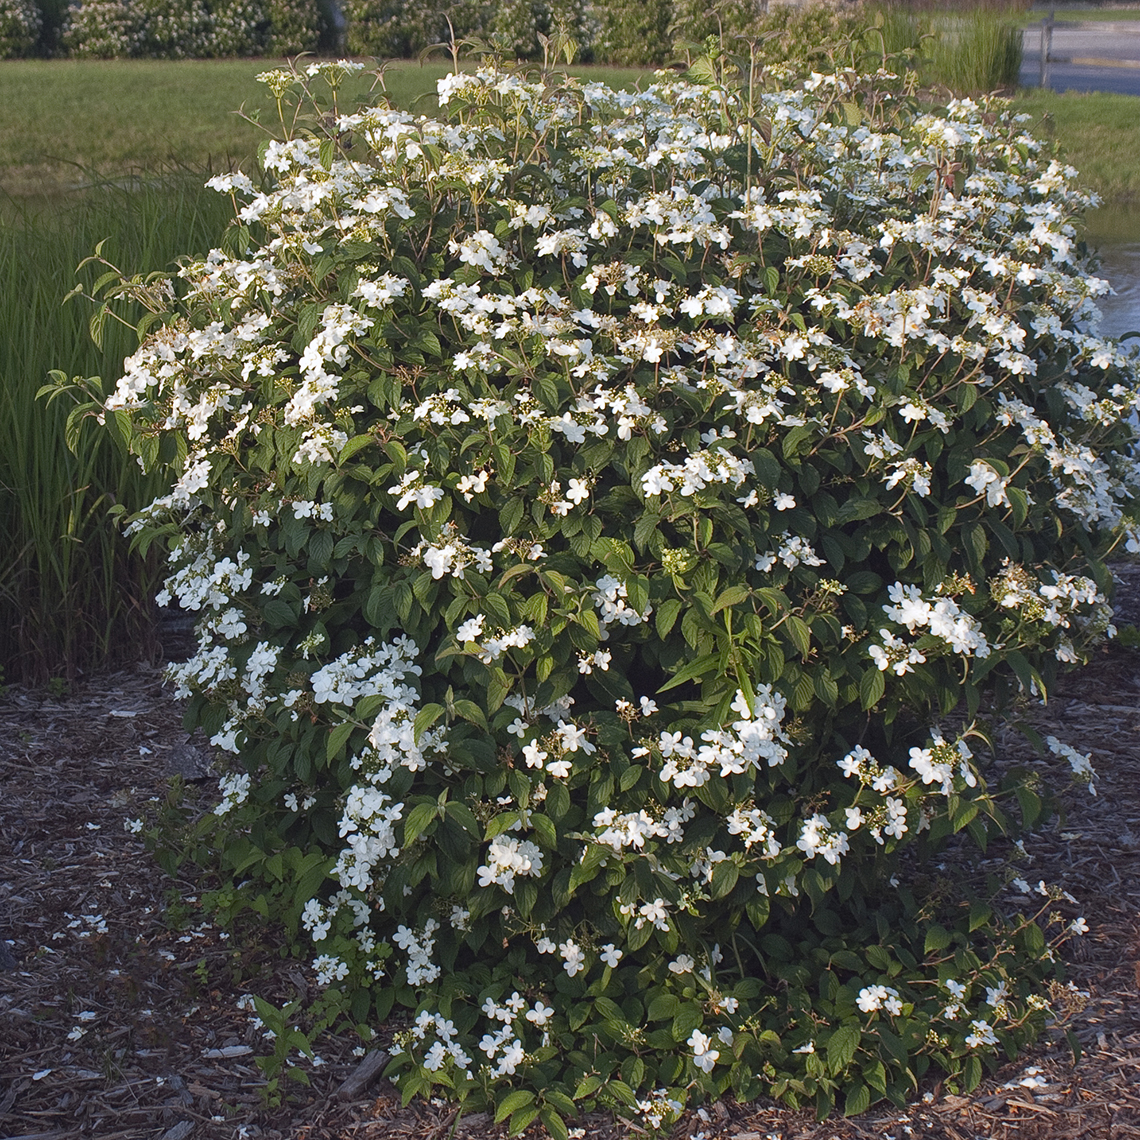 Summer Snowflake doublefile viburnum in a landscape with a full display of white lacecap flowers